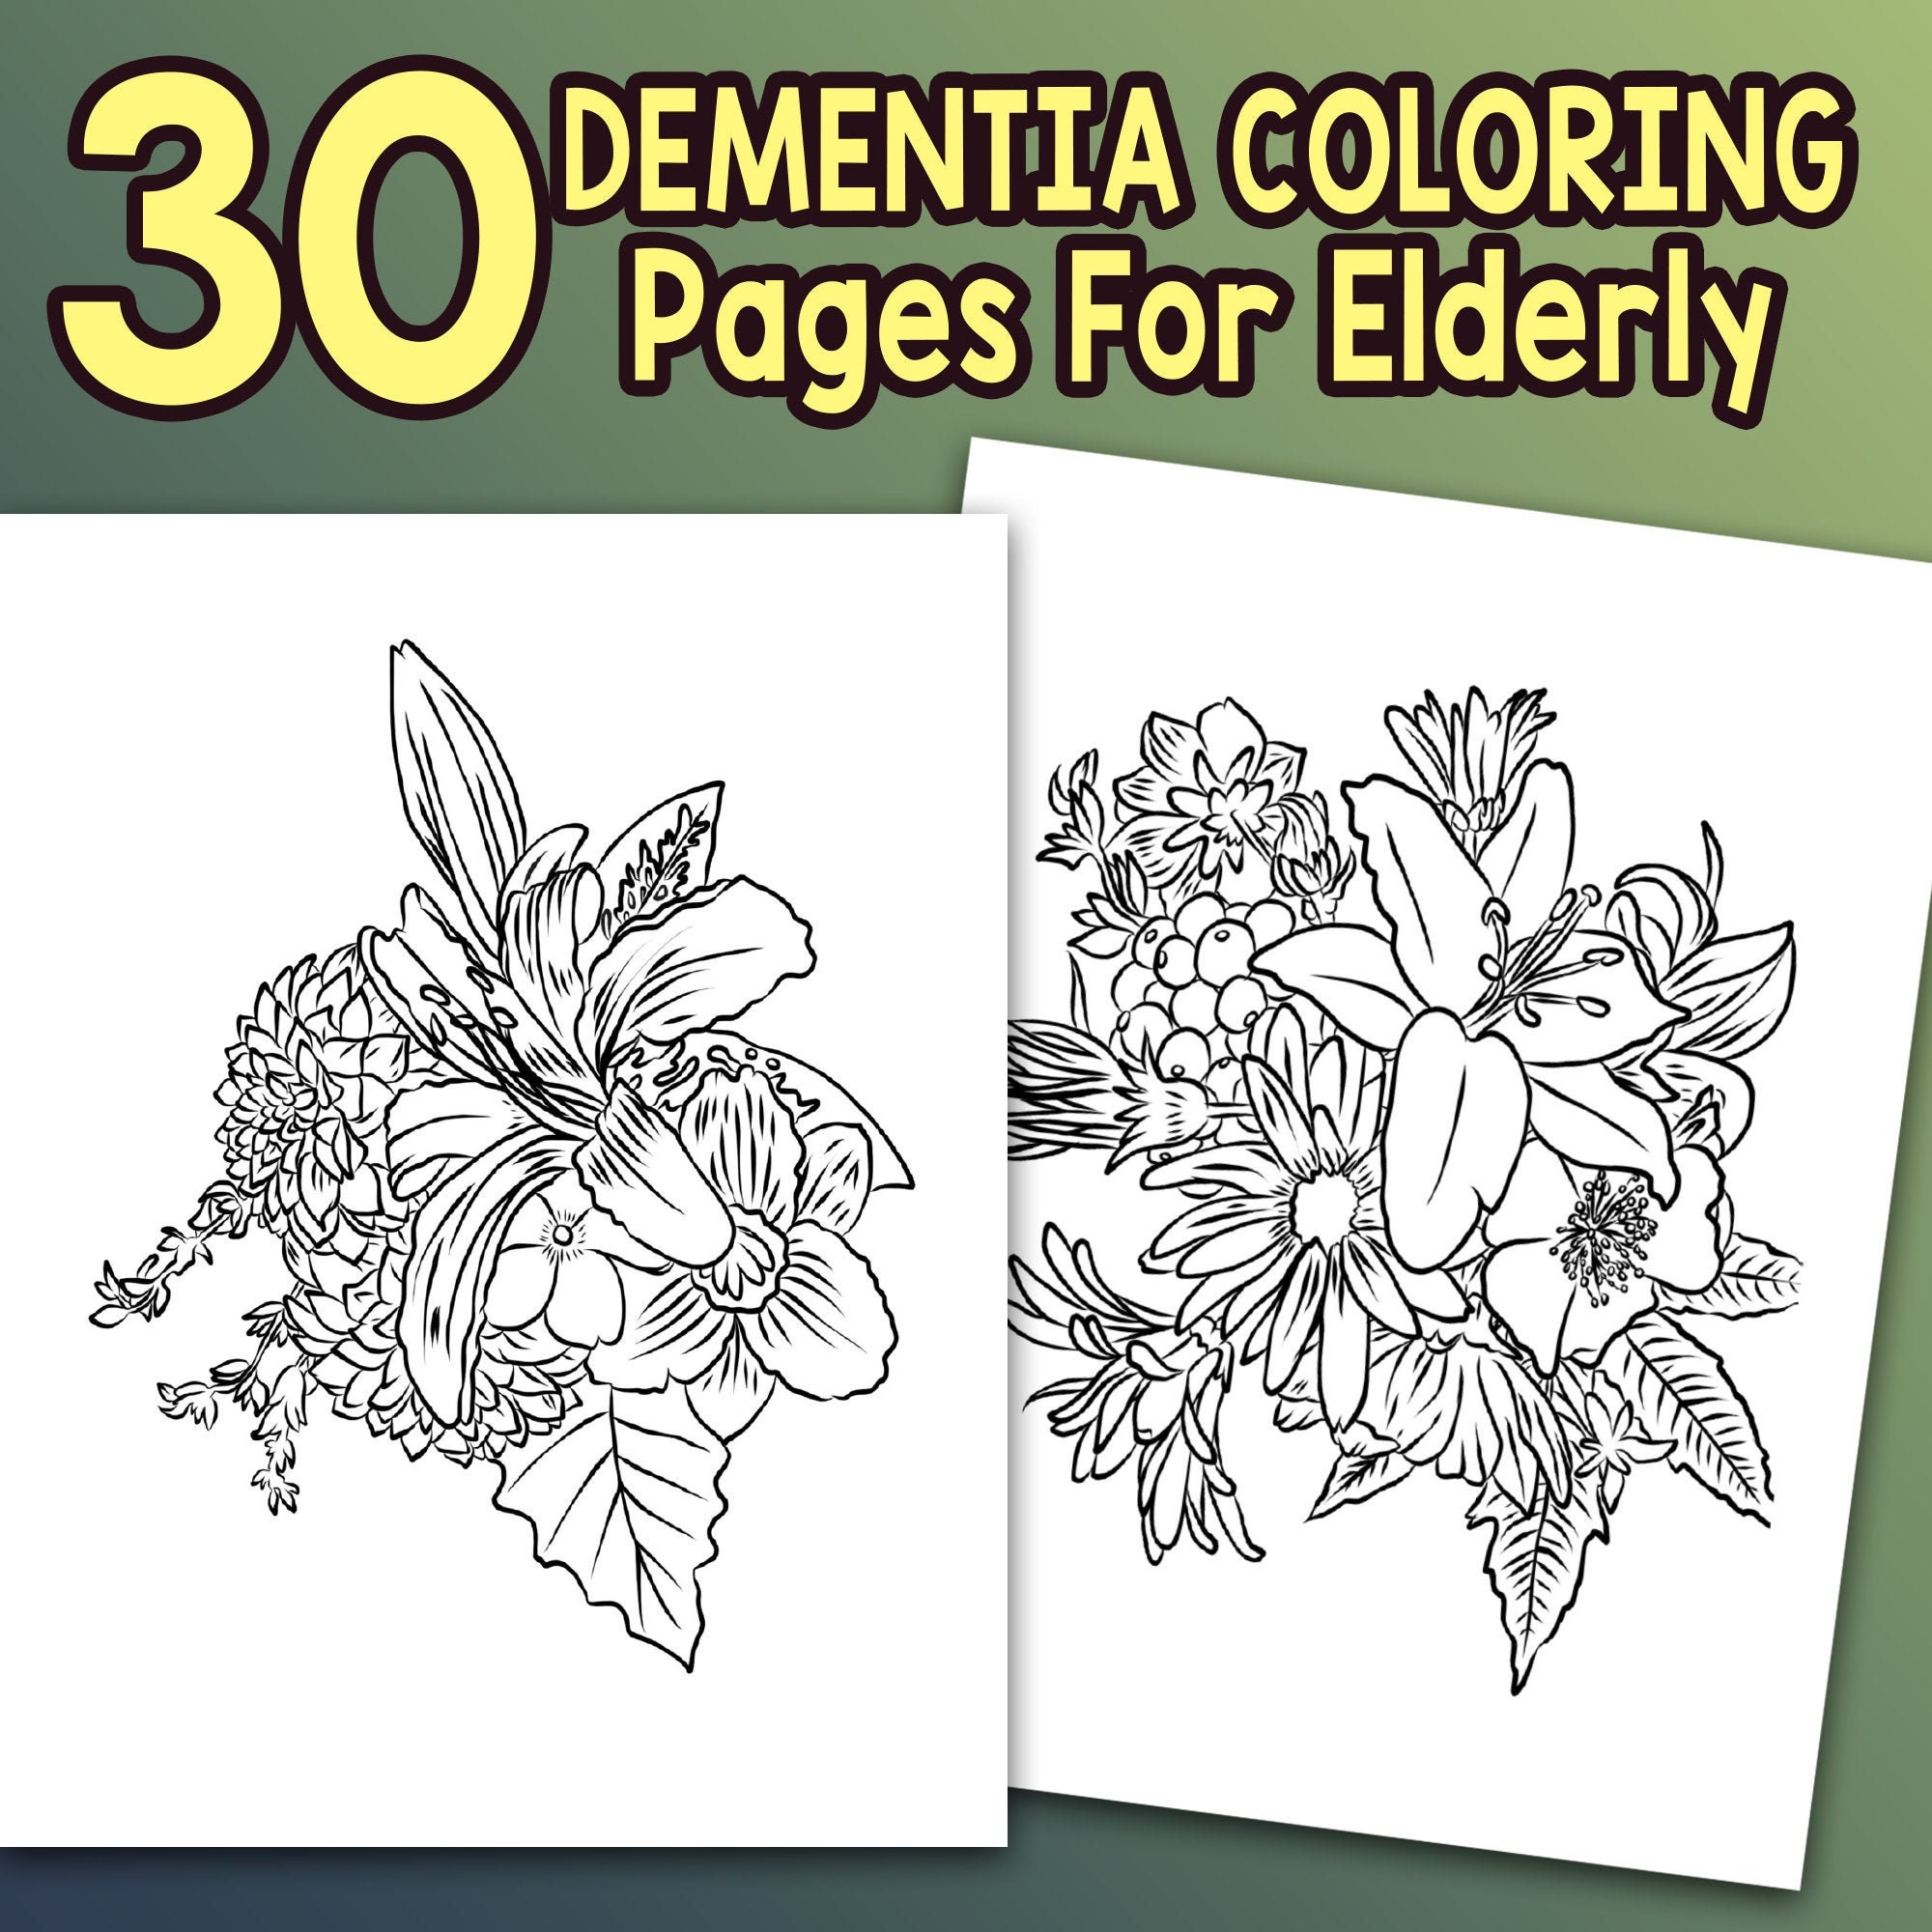 Coloring Book for Adults with Dementia: Alphabet: Simple Coloring Books  Series for Beginners, Seniors, (Dementia, Alzheimer's, Parkinson's  or  moto (Paperback)